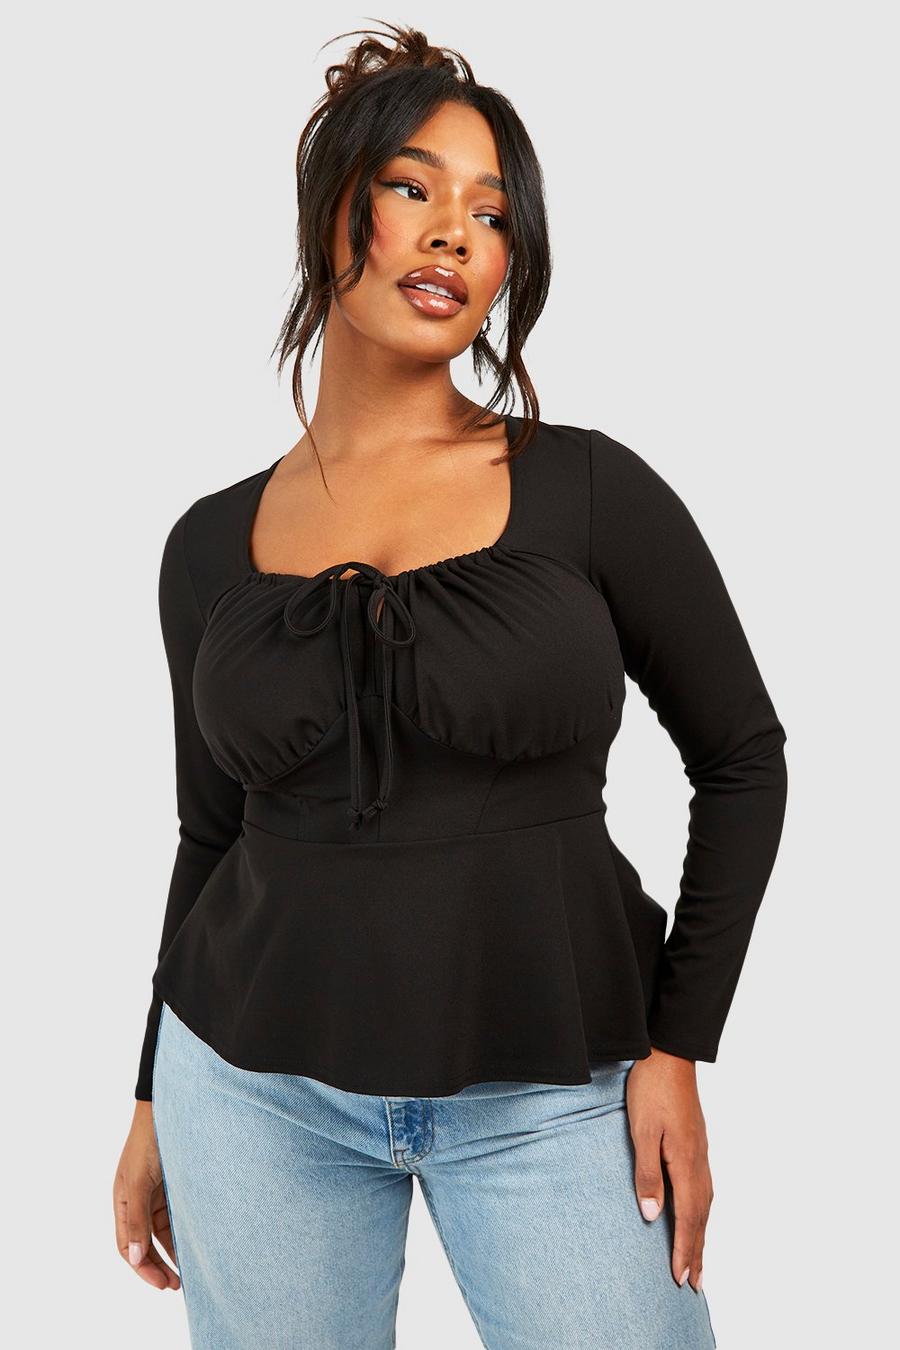 15 plus size outfits with peplum tops you can wear too  Plus size outfits, Plus  size fashion, Plus size peplum